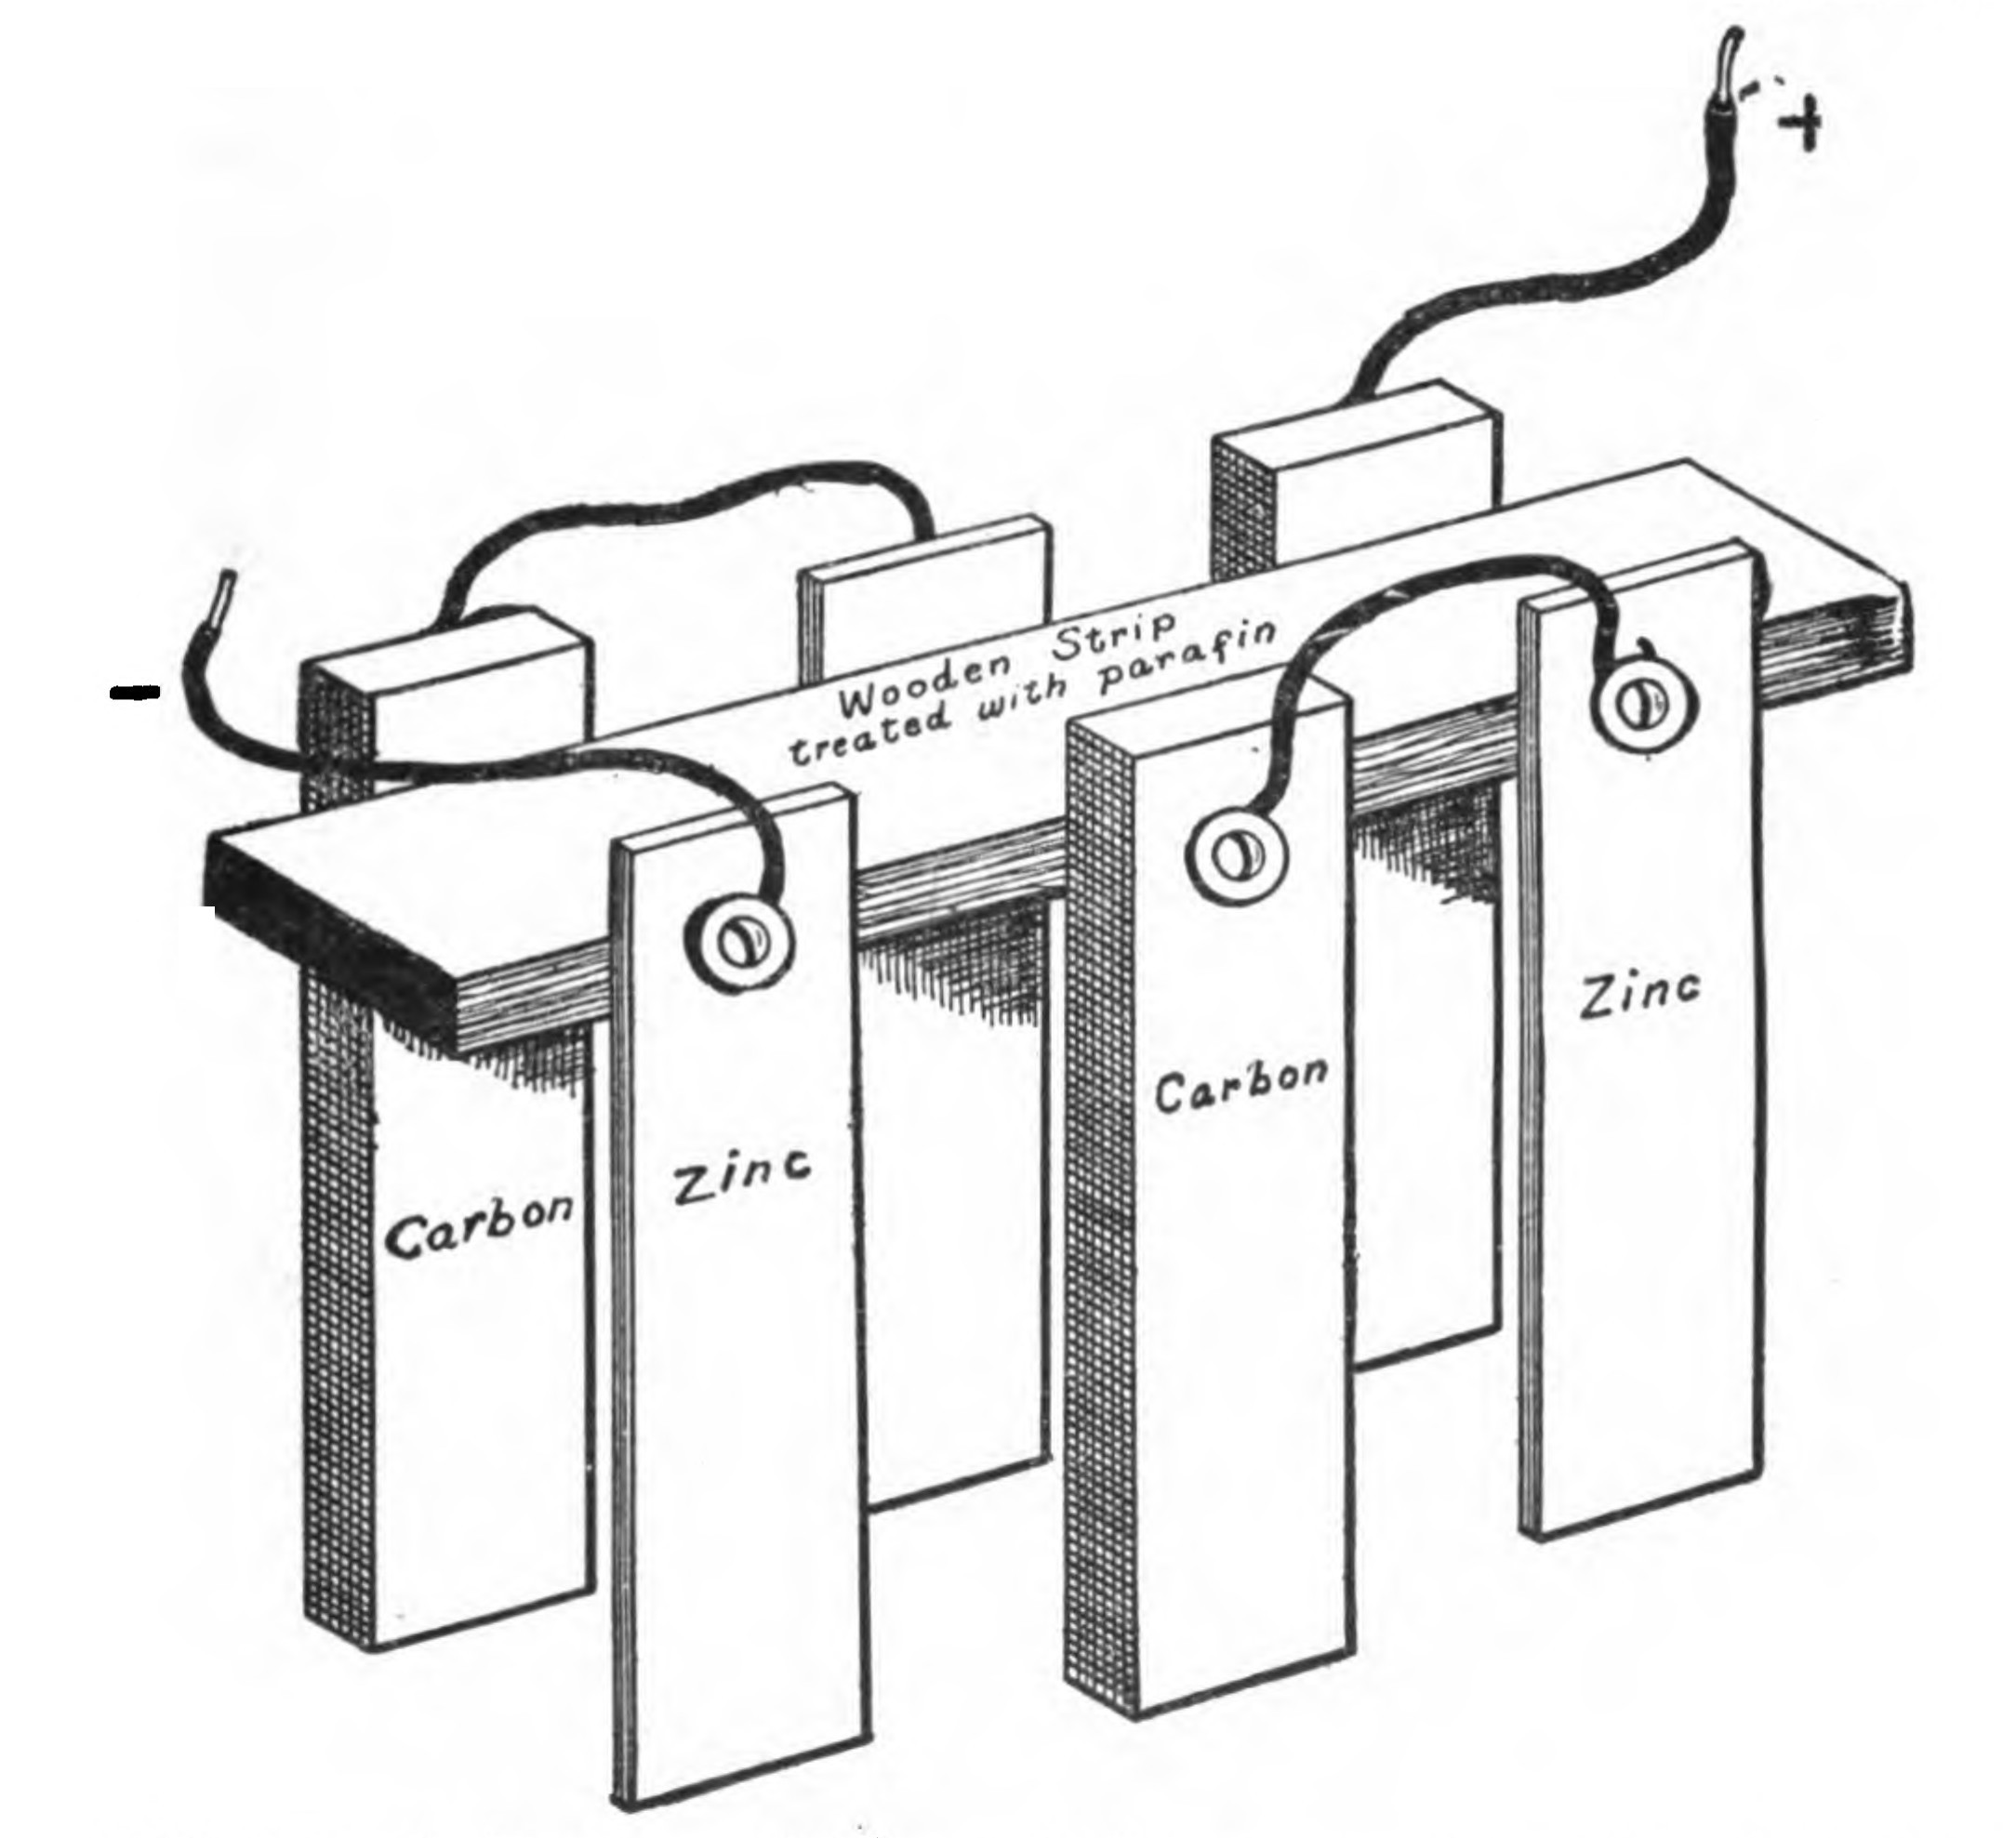 FIG. 32.—A Battery of Three Cells arranged so that they can all be lifted out of the solution at once.